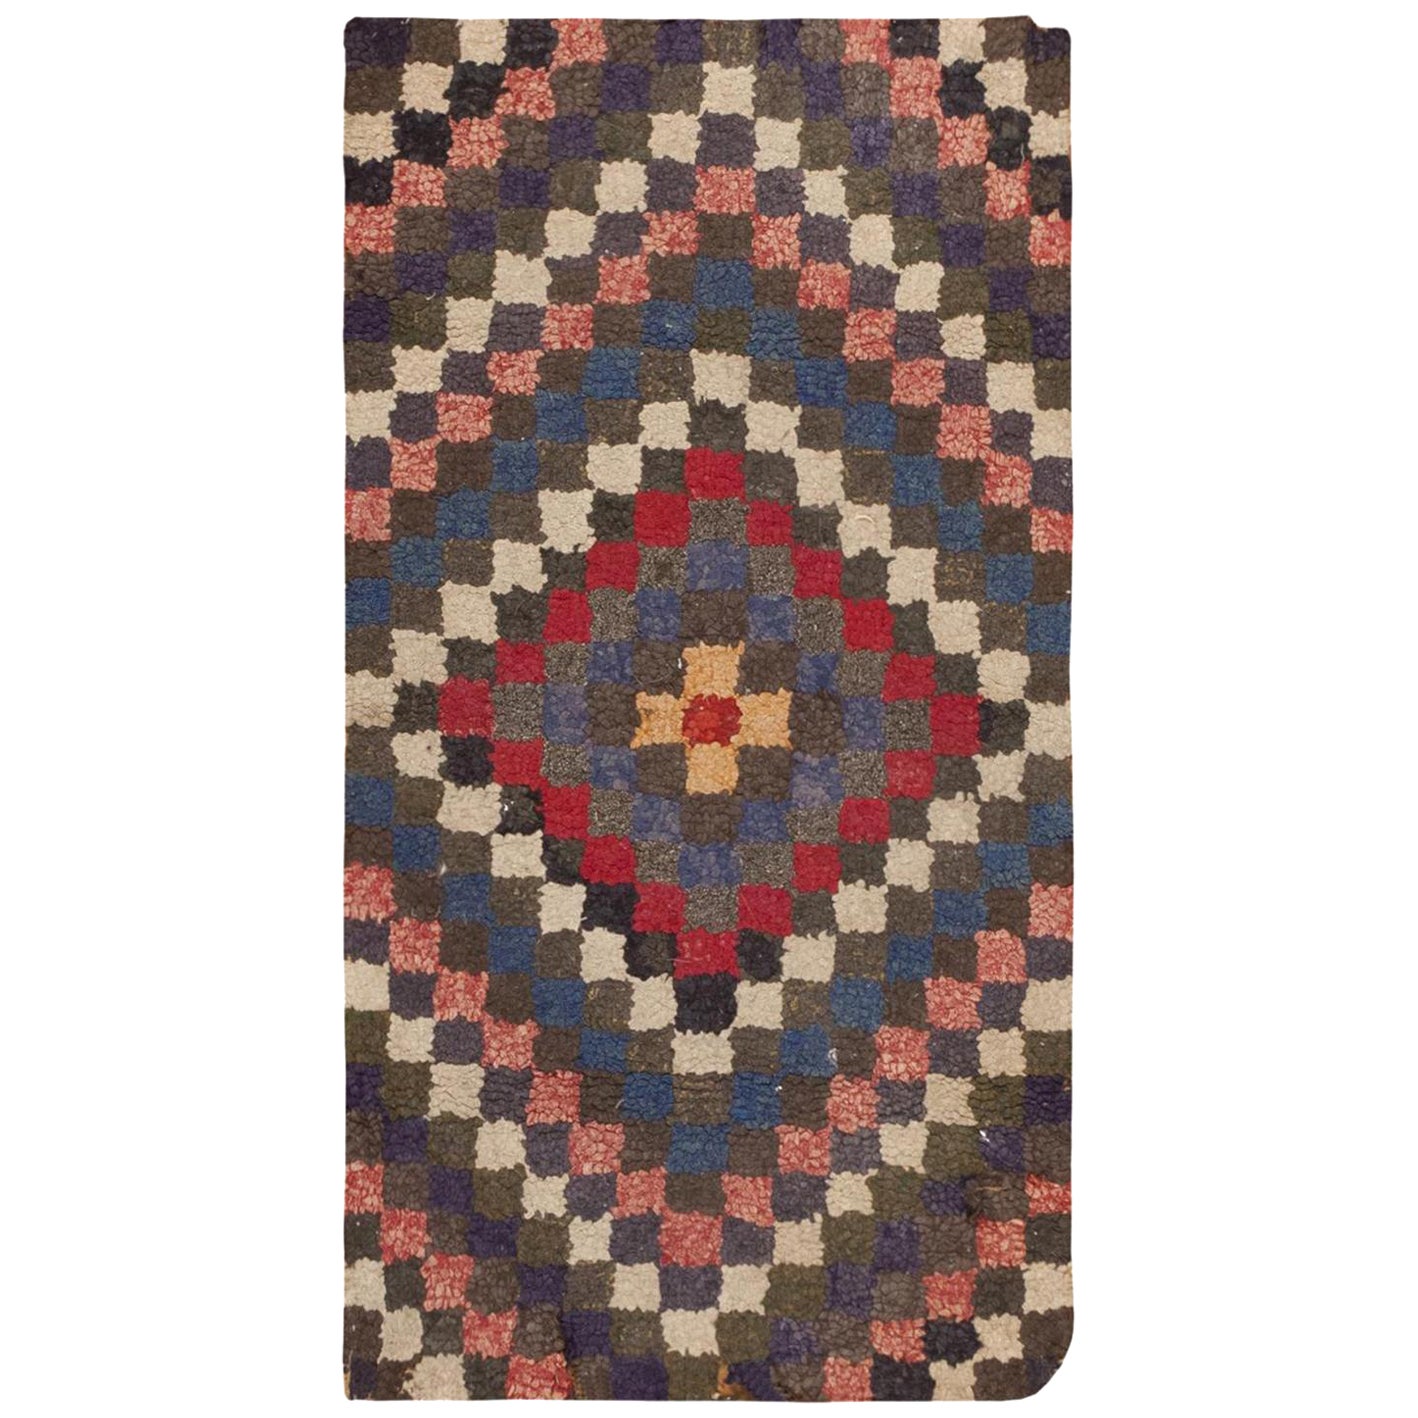 Small Scatter Size Bold Geometric Antique American Hooked Rug 1'9" x 3'3" For Sale